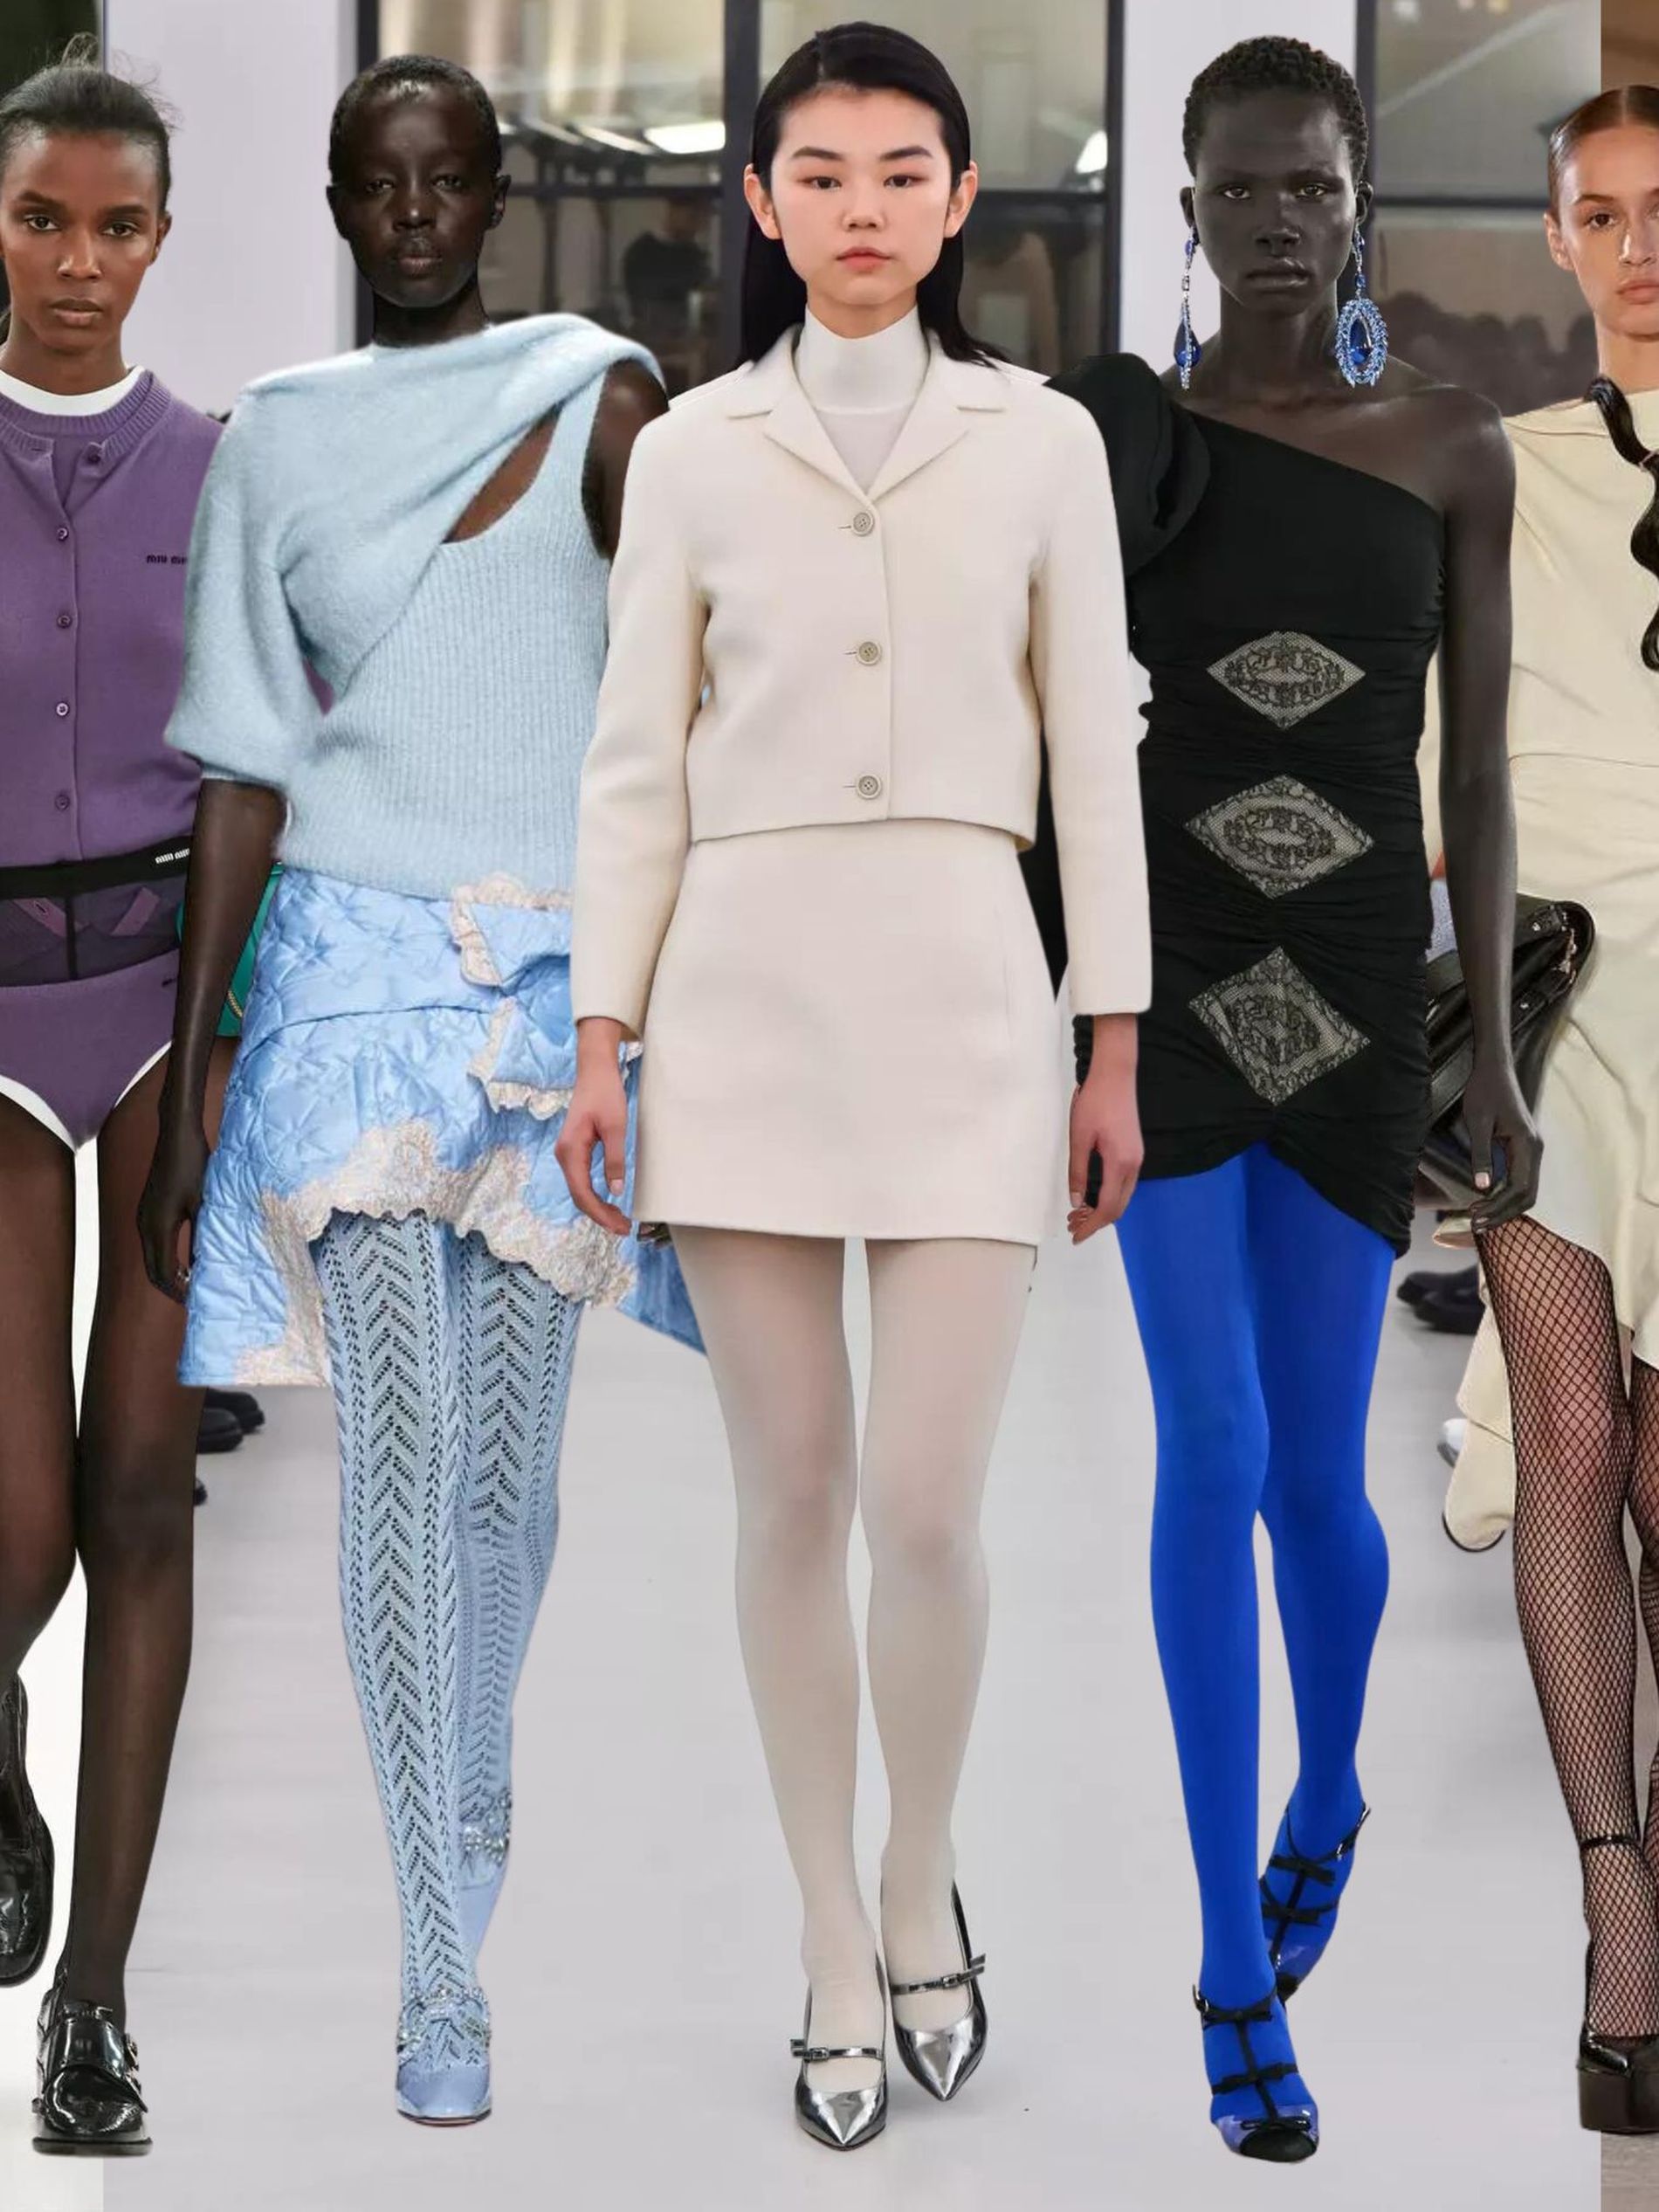 Legwear Trend: 6 Chic Ways to Style Tights and Hosiery Now